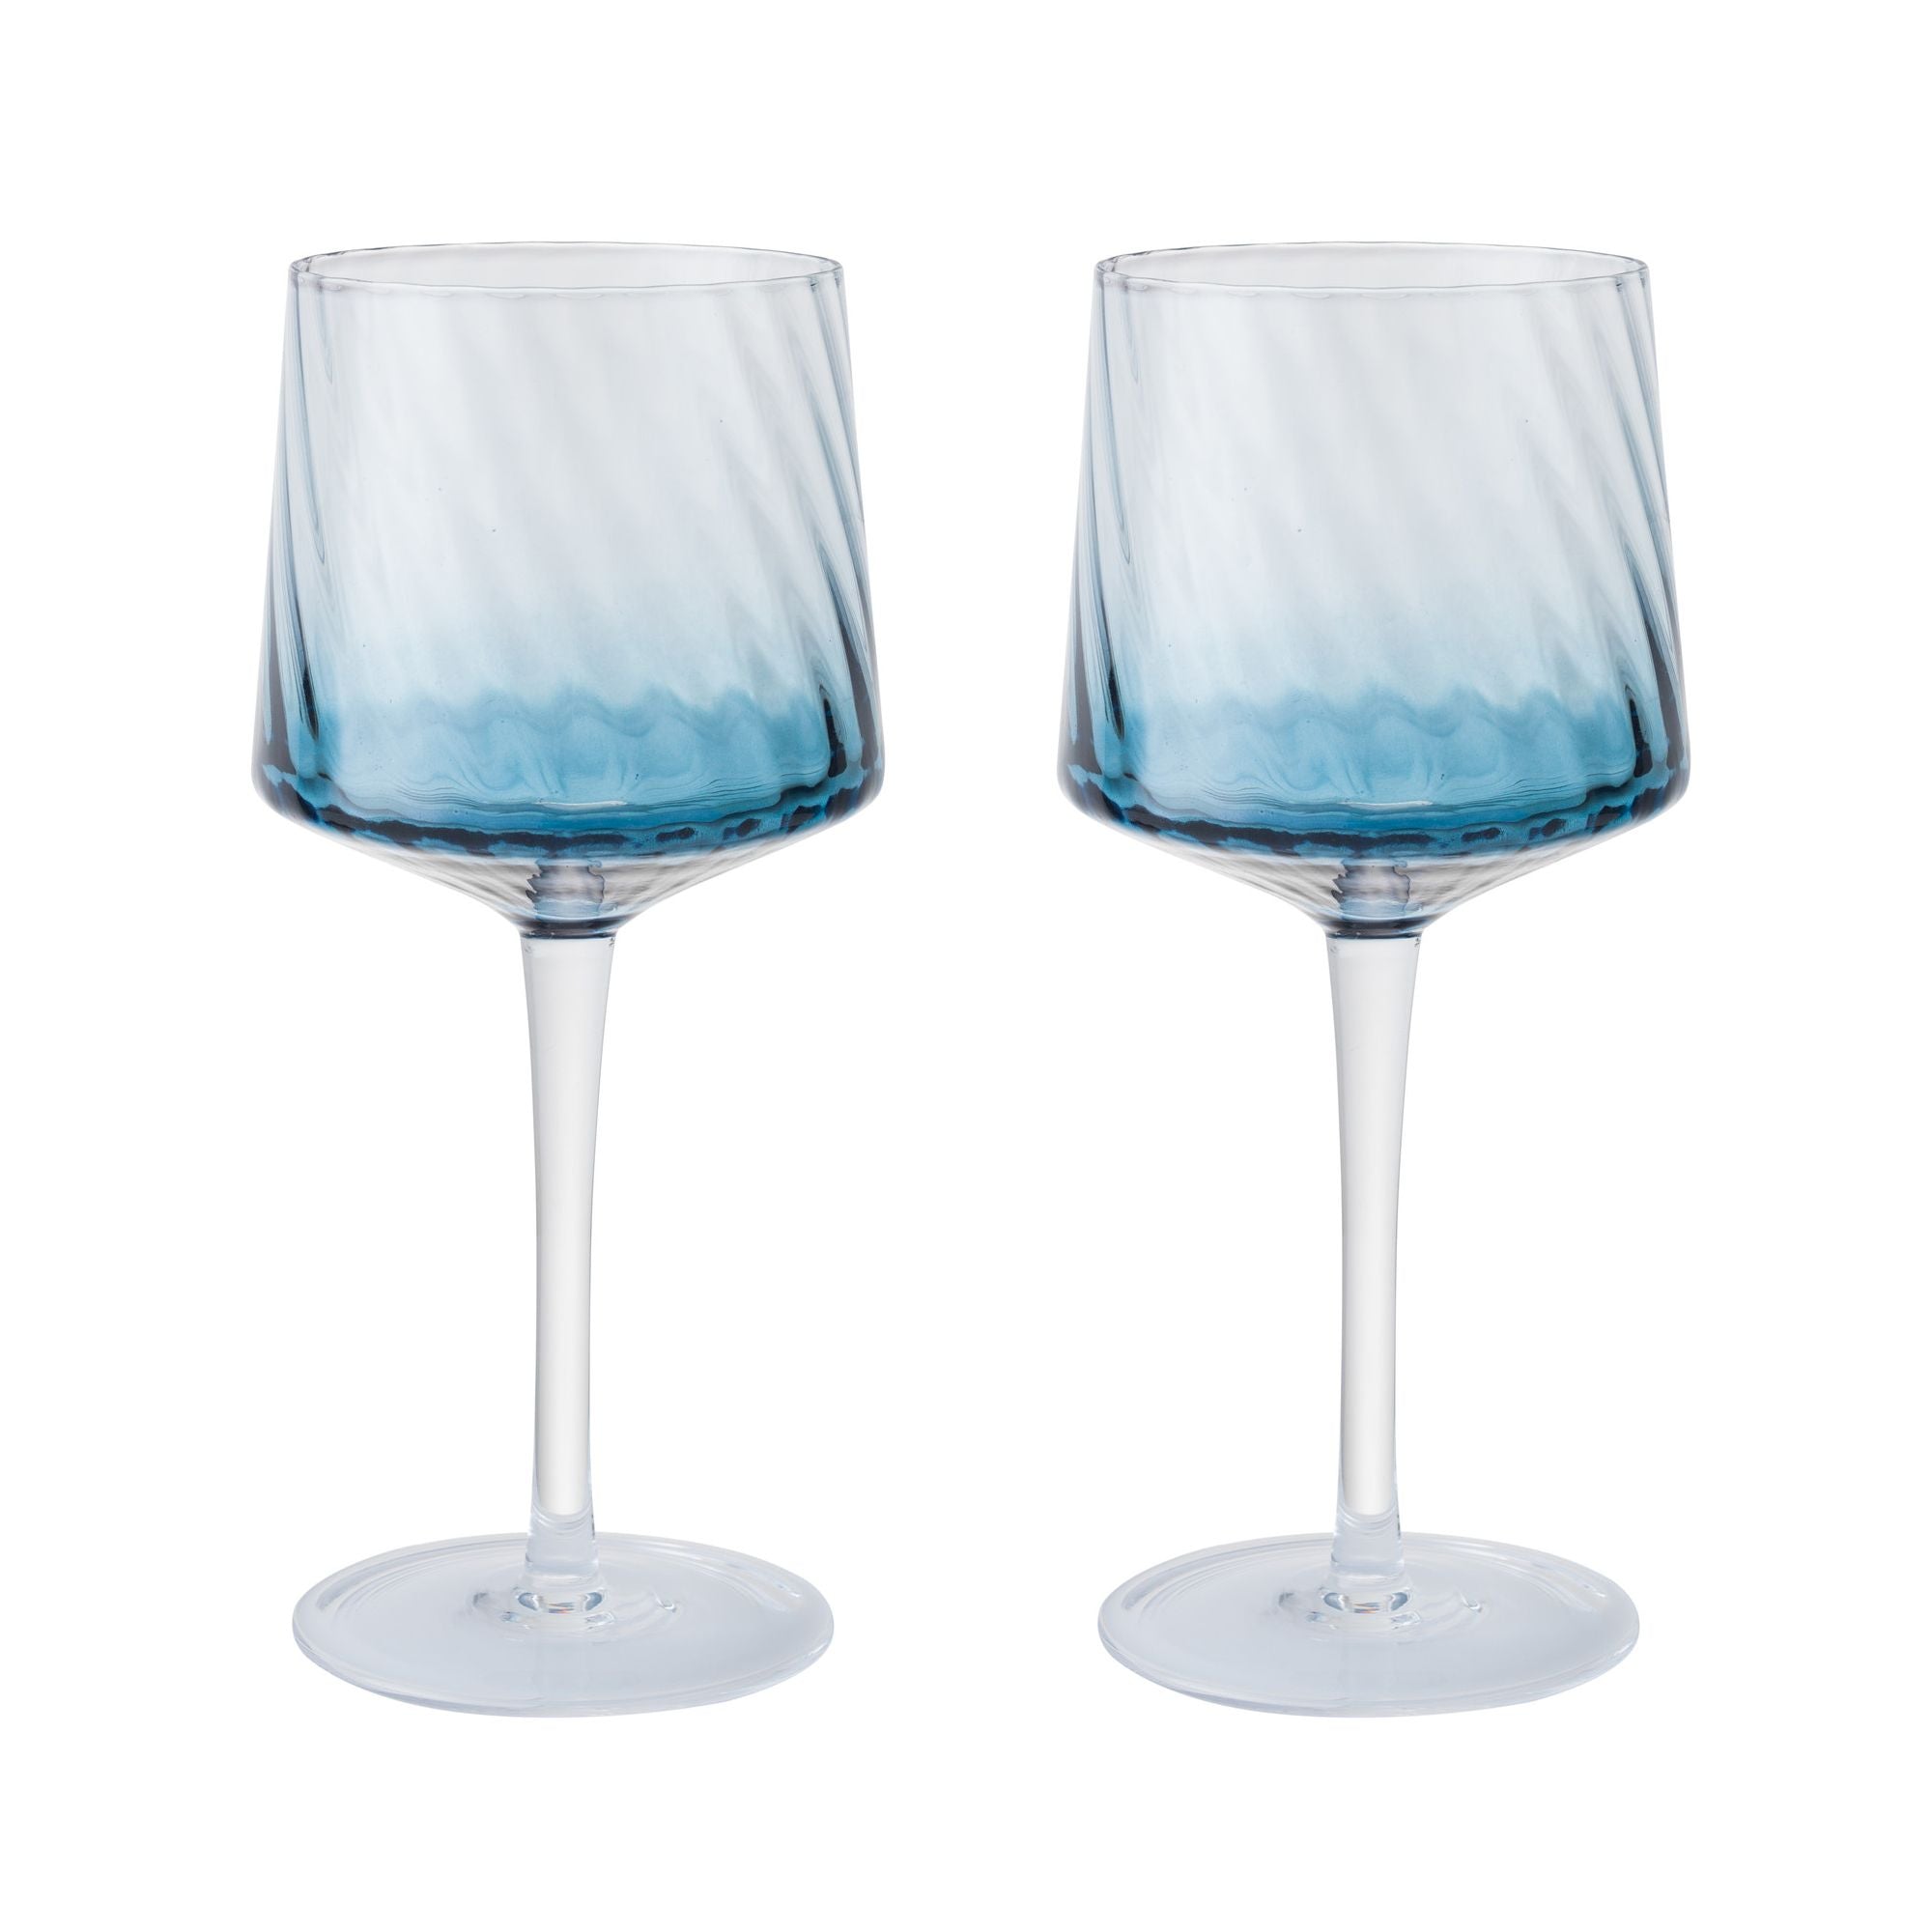 Denby Contemporary Blue Fluted Gin Glass Pair